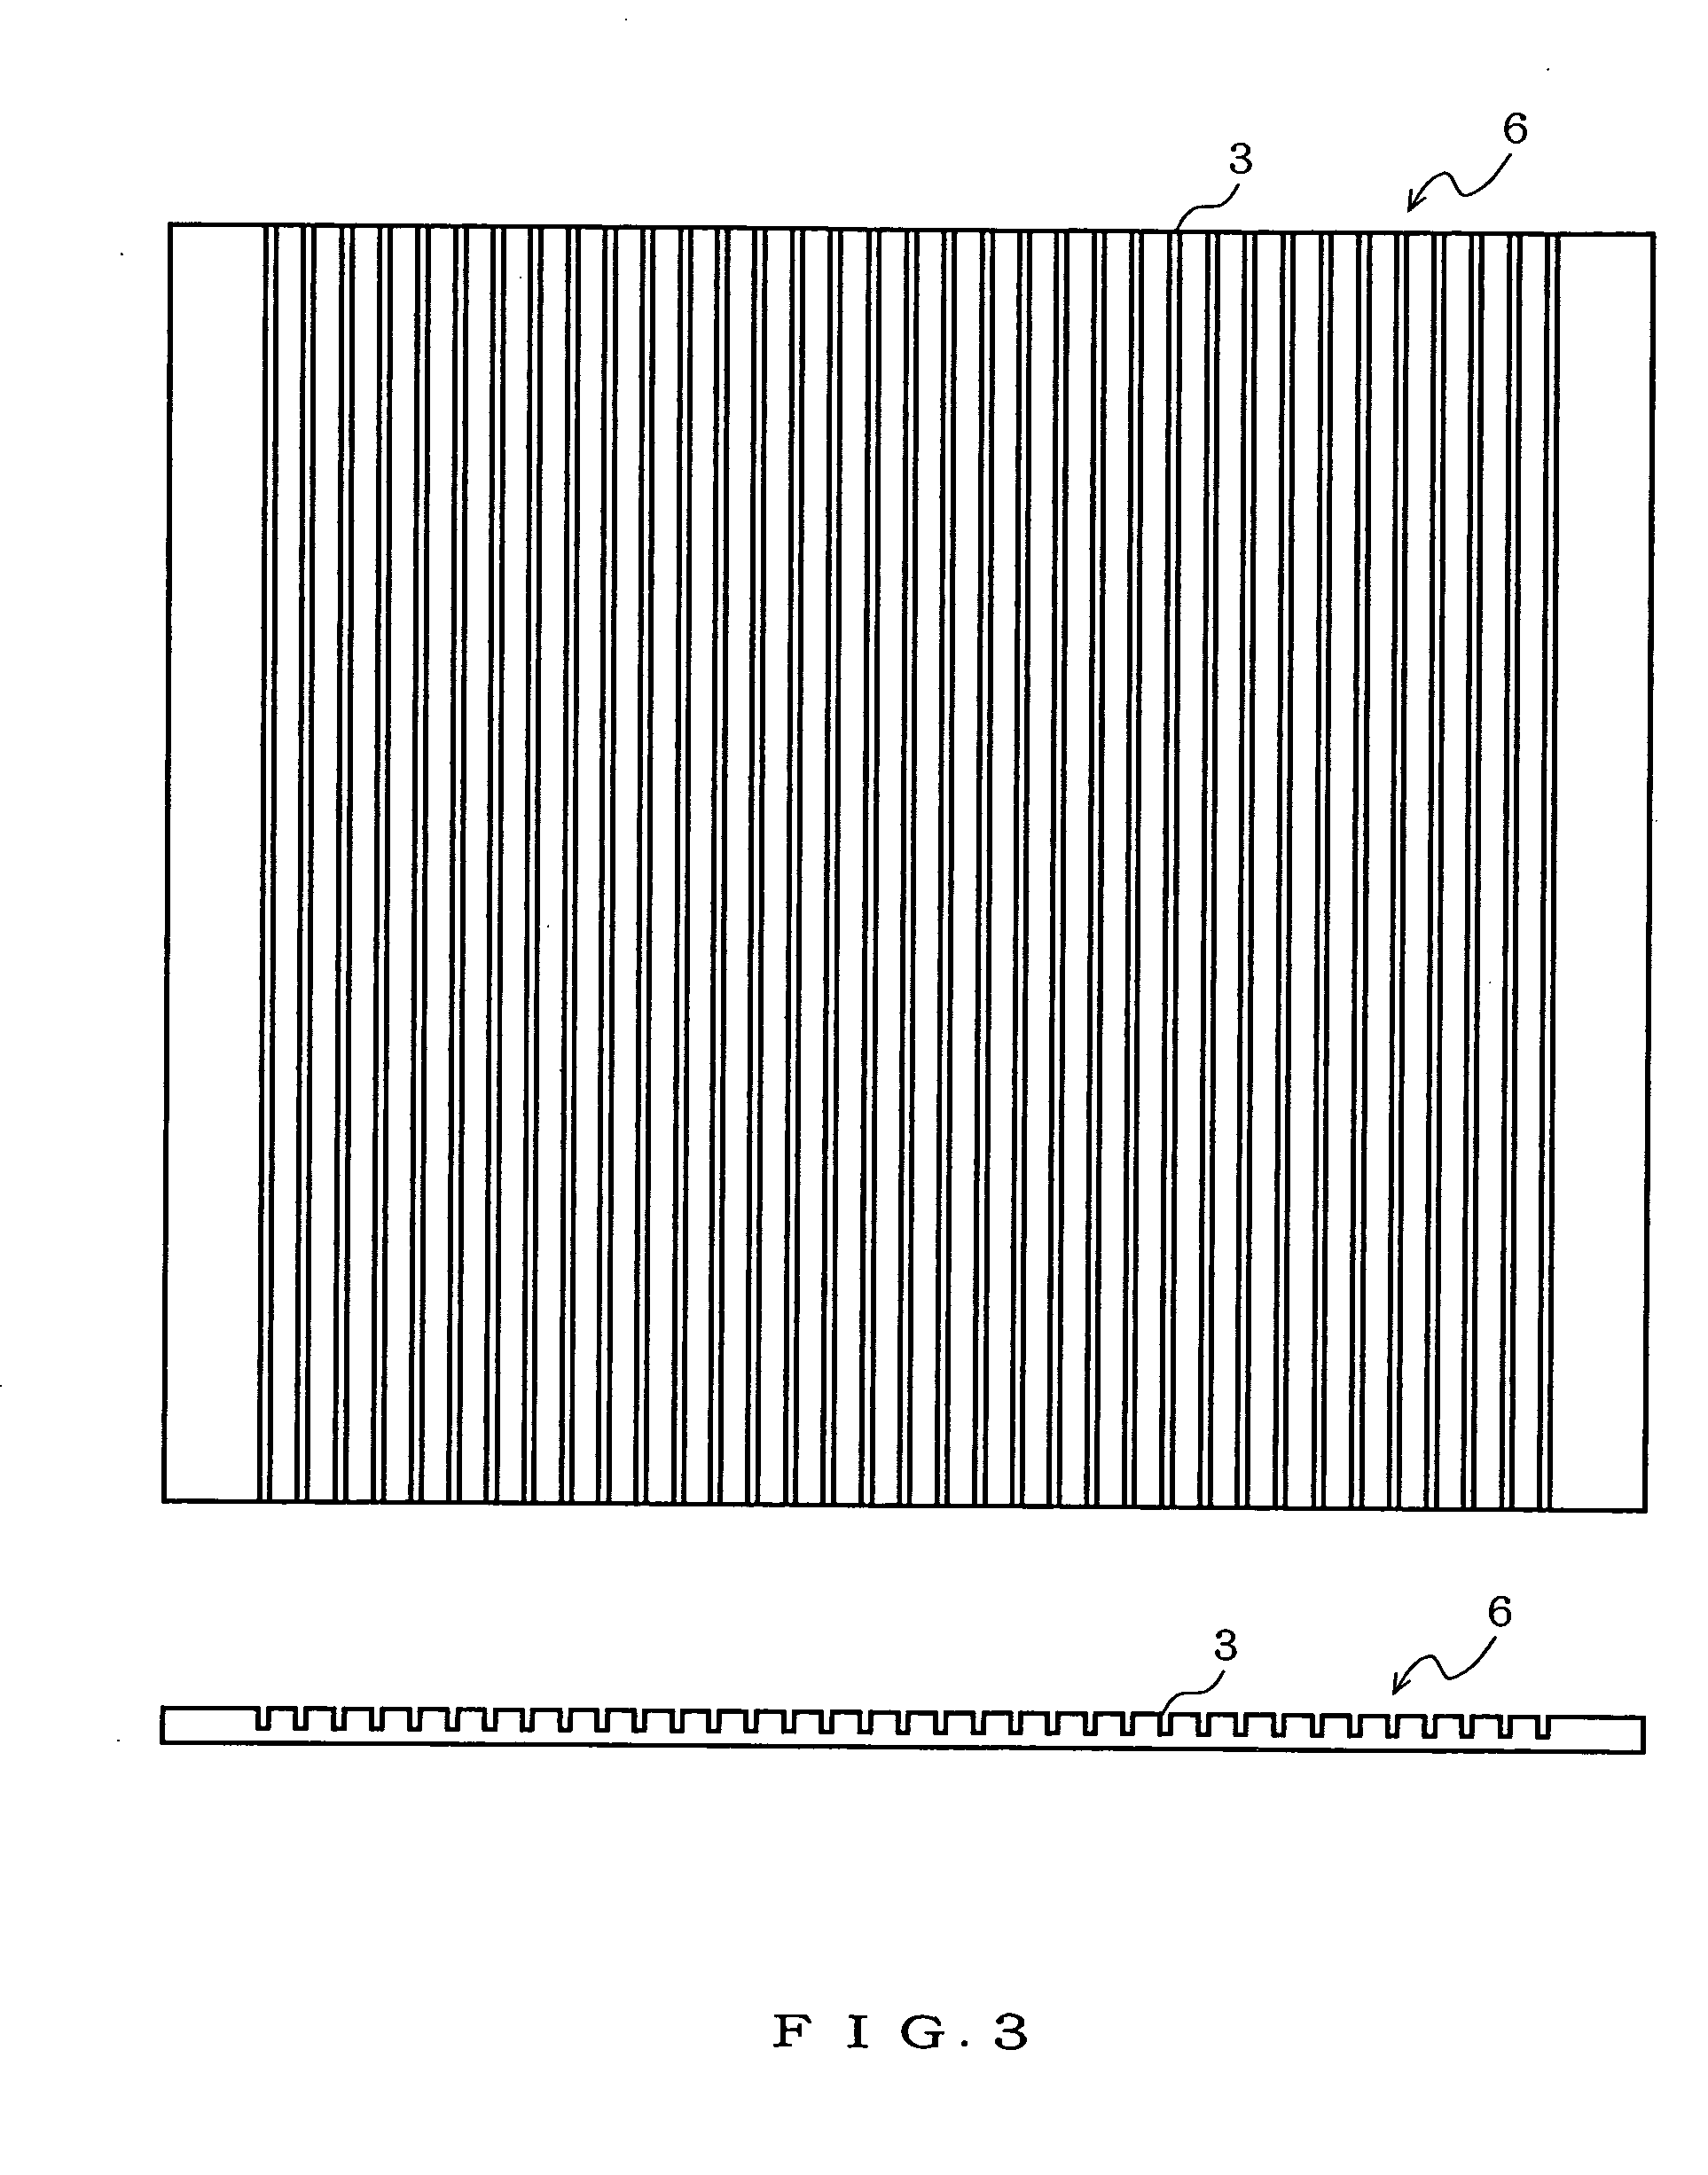 Lens plate, method for manufacturing the same and image transfer device